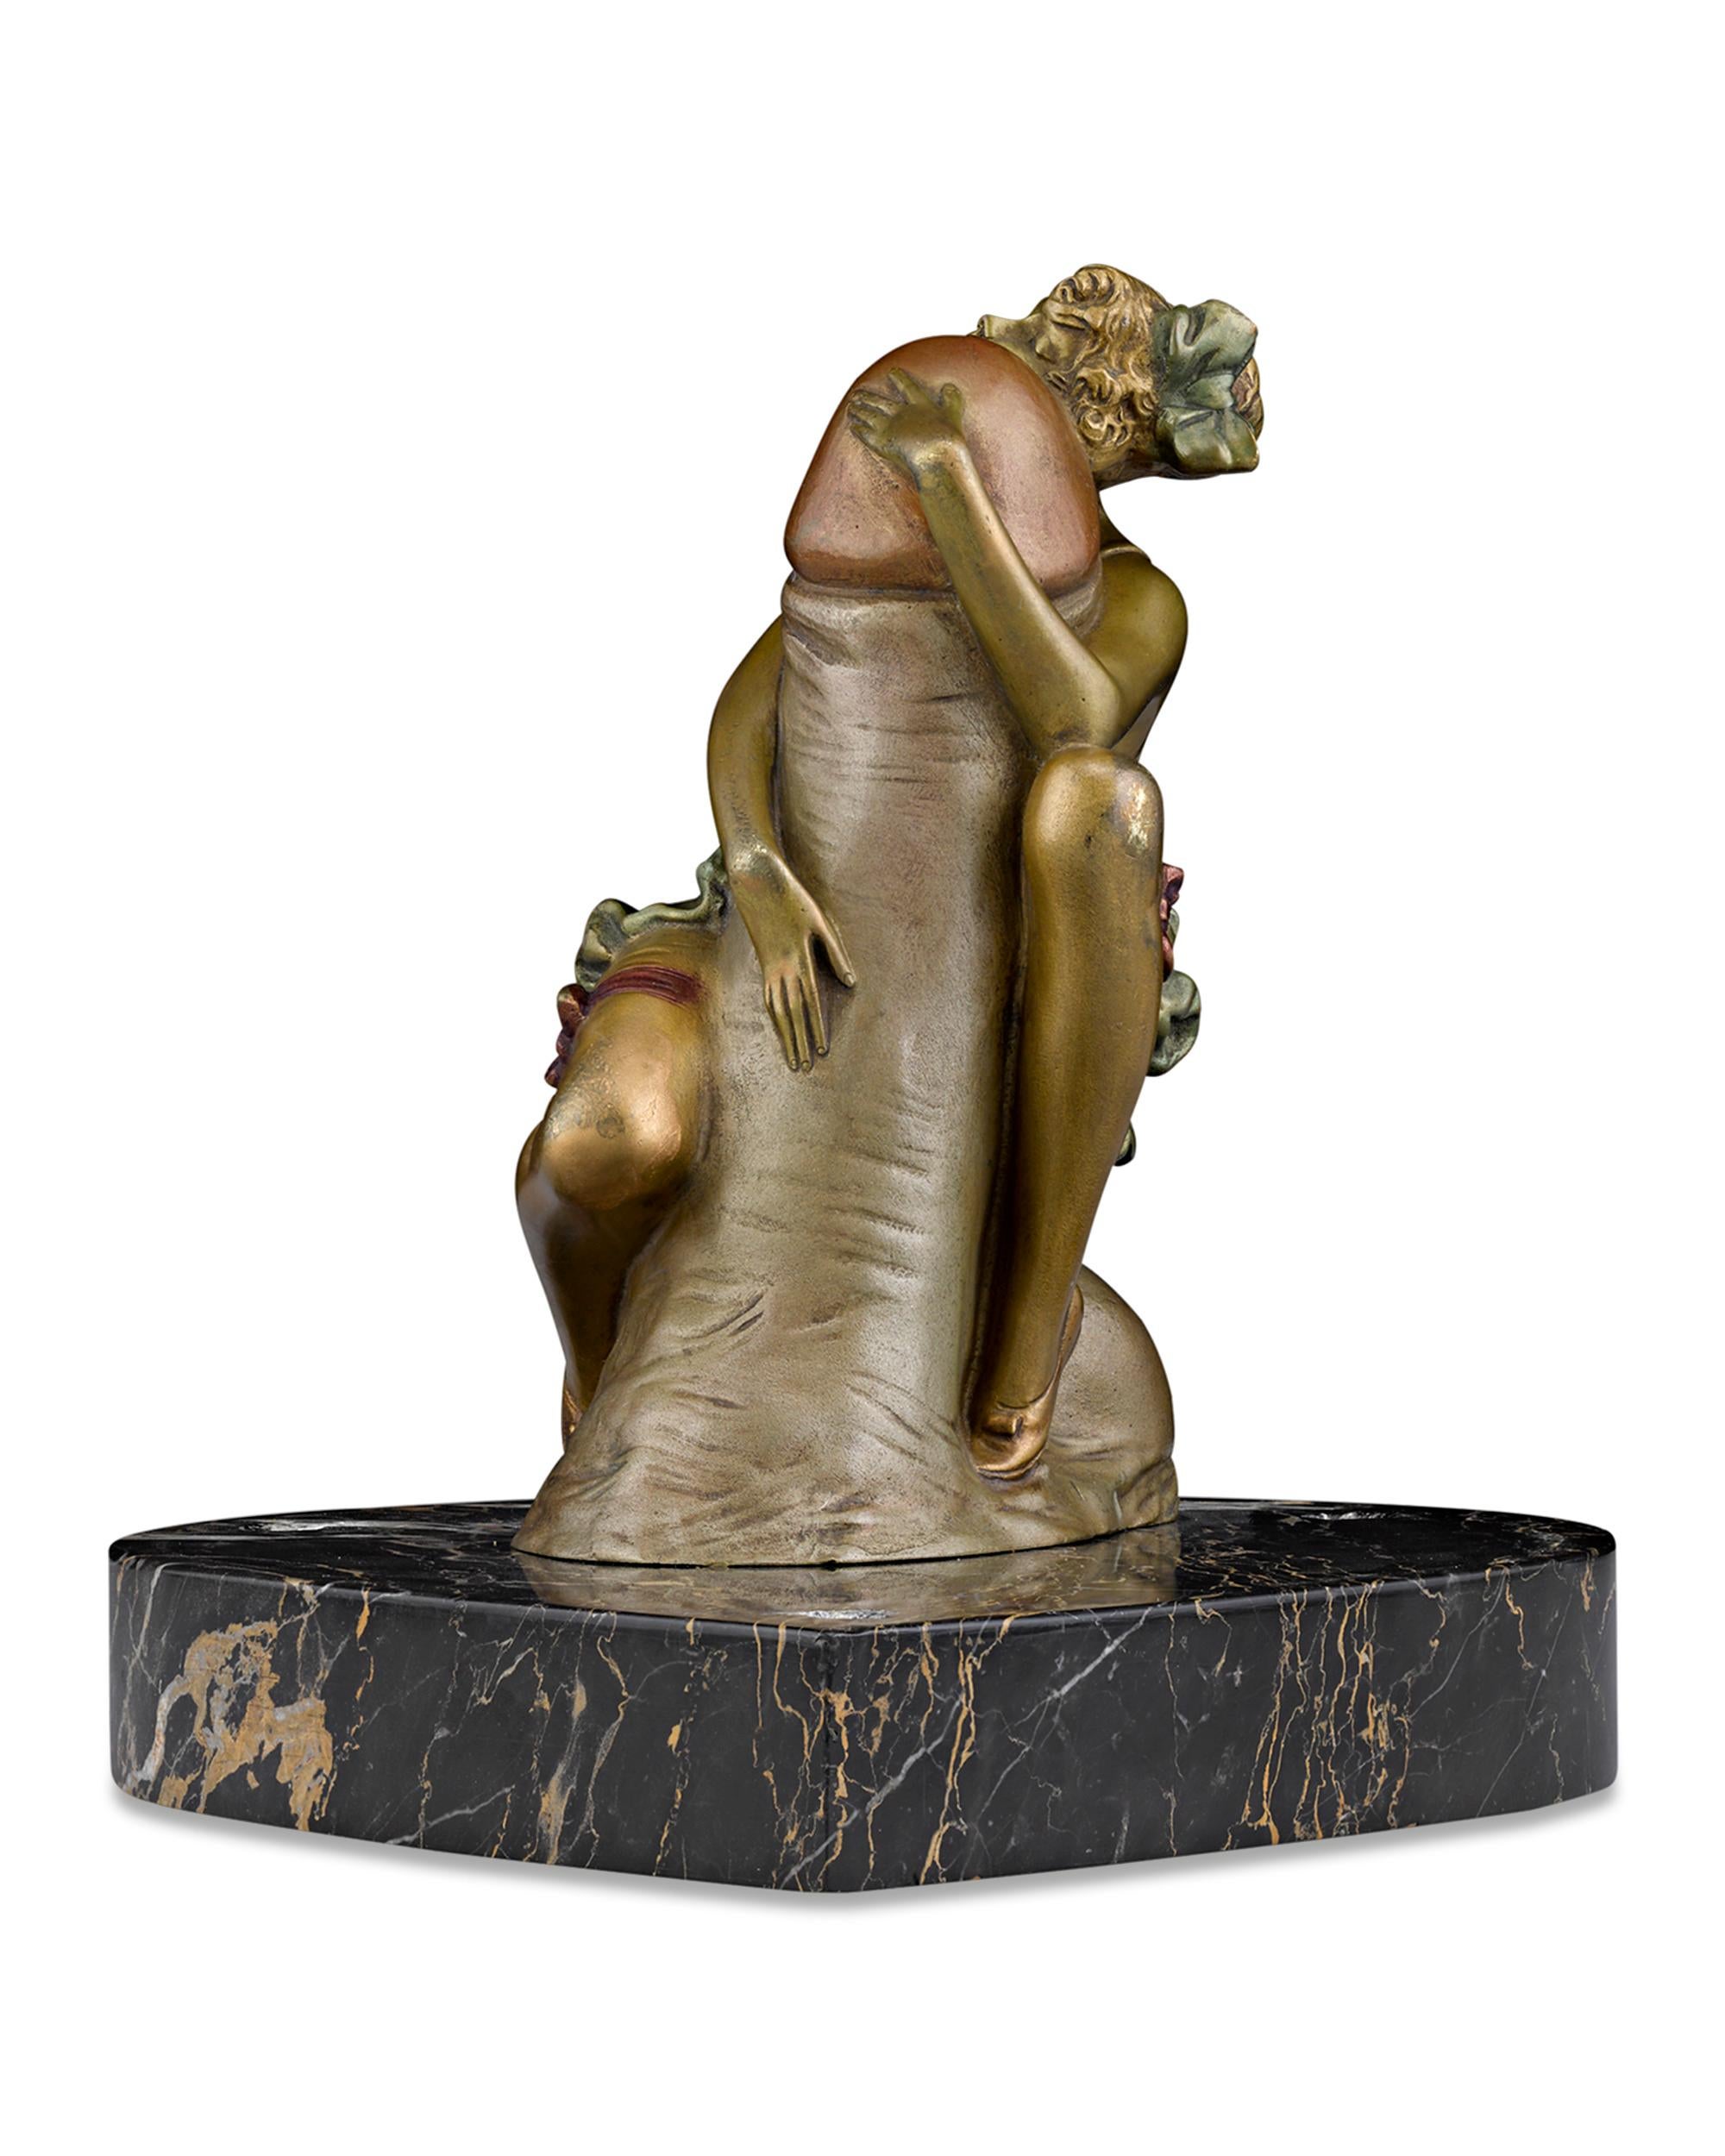 Polychromed The Hugger Erotic Bronze Attributed to Bruno Zach